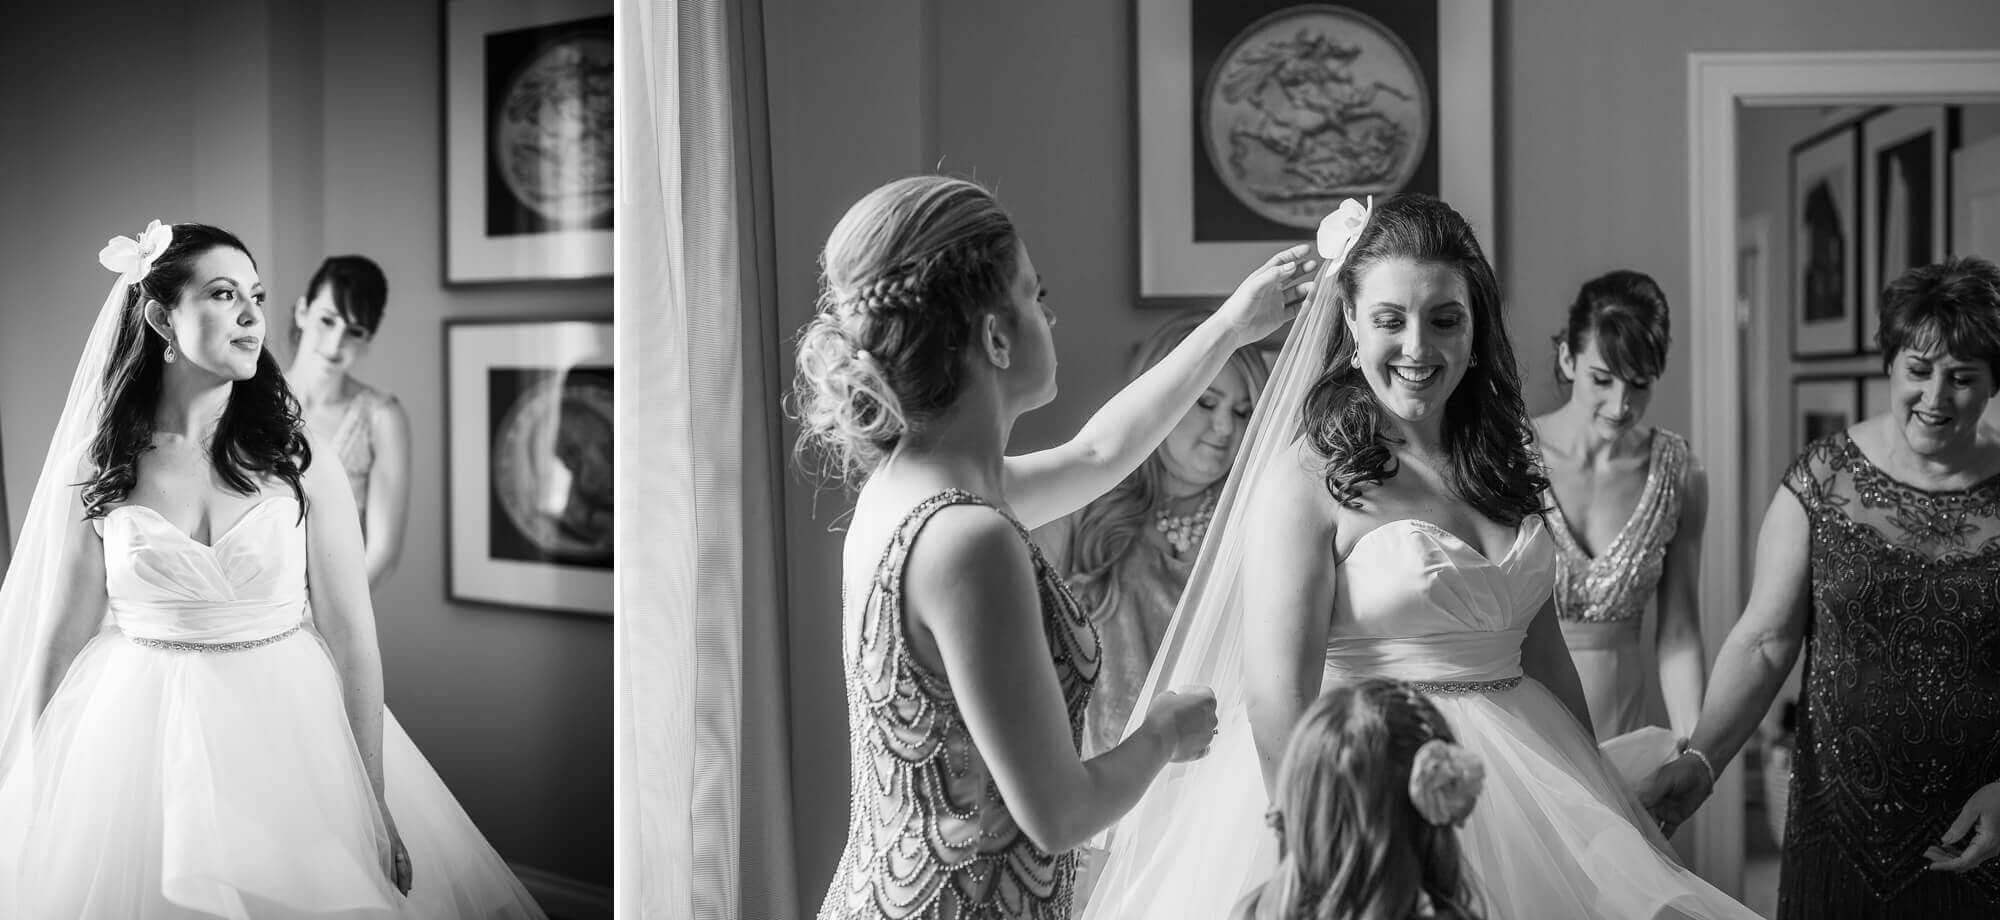 Details of the bride's last minute outfit touches as her brides maids place on her veil at the Omni King Edward Hotel in Toronto